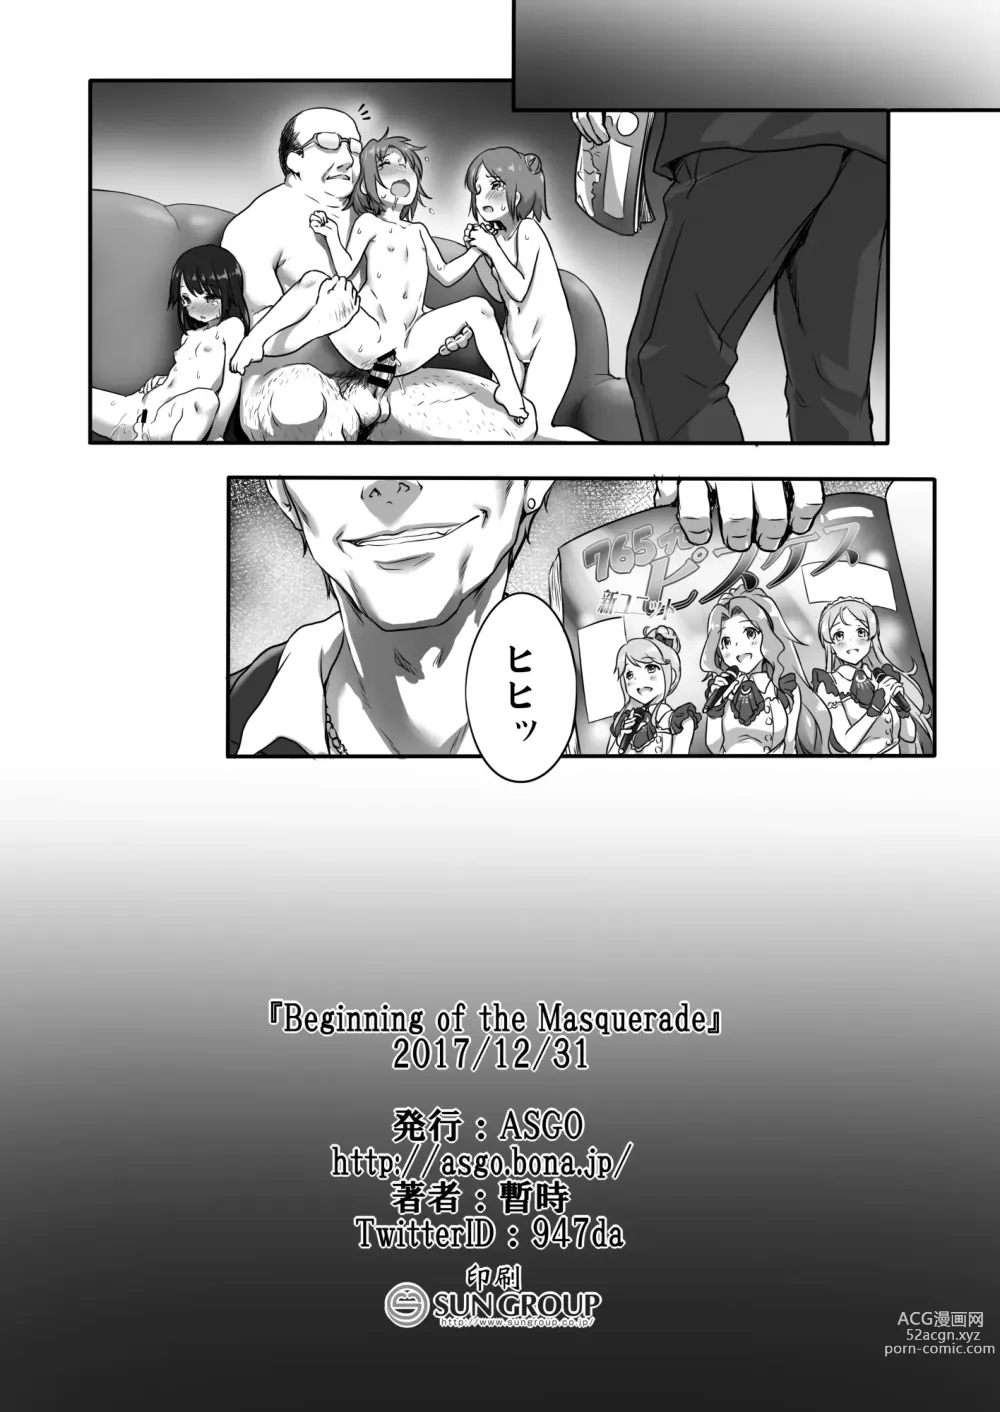 Page 24 of doujinshi Beginning of the Masquerade